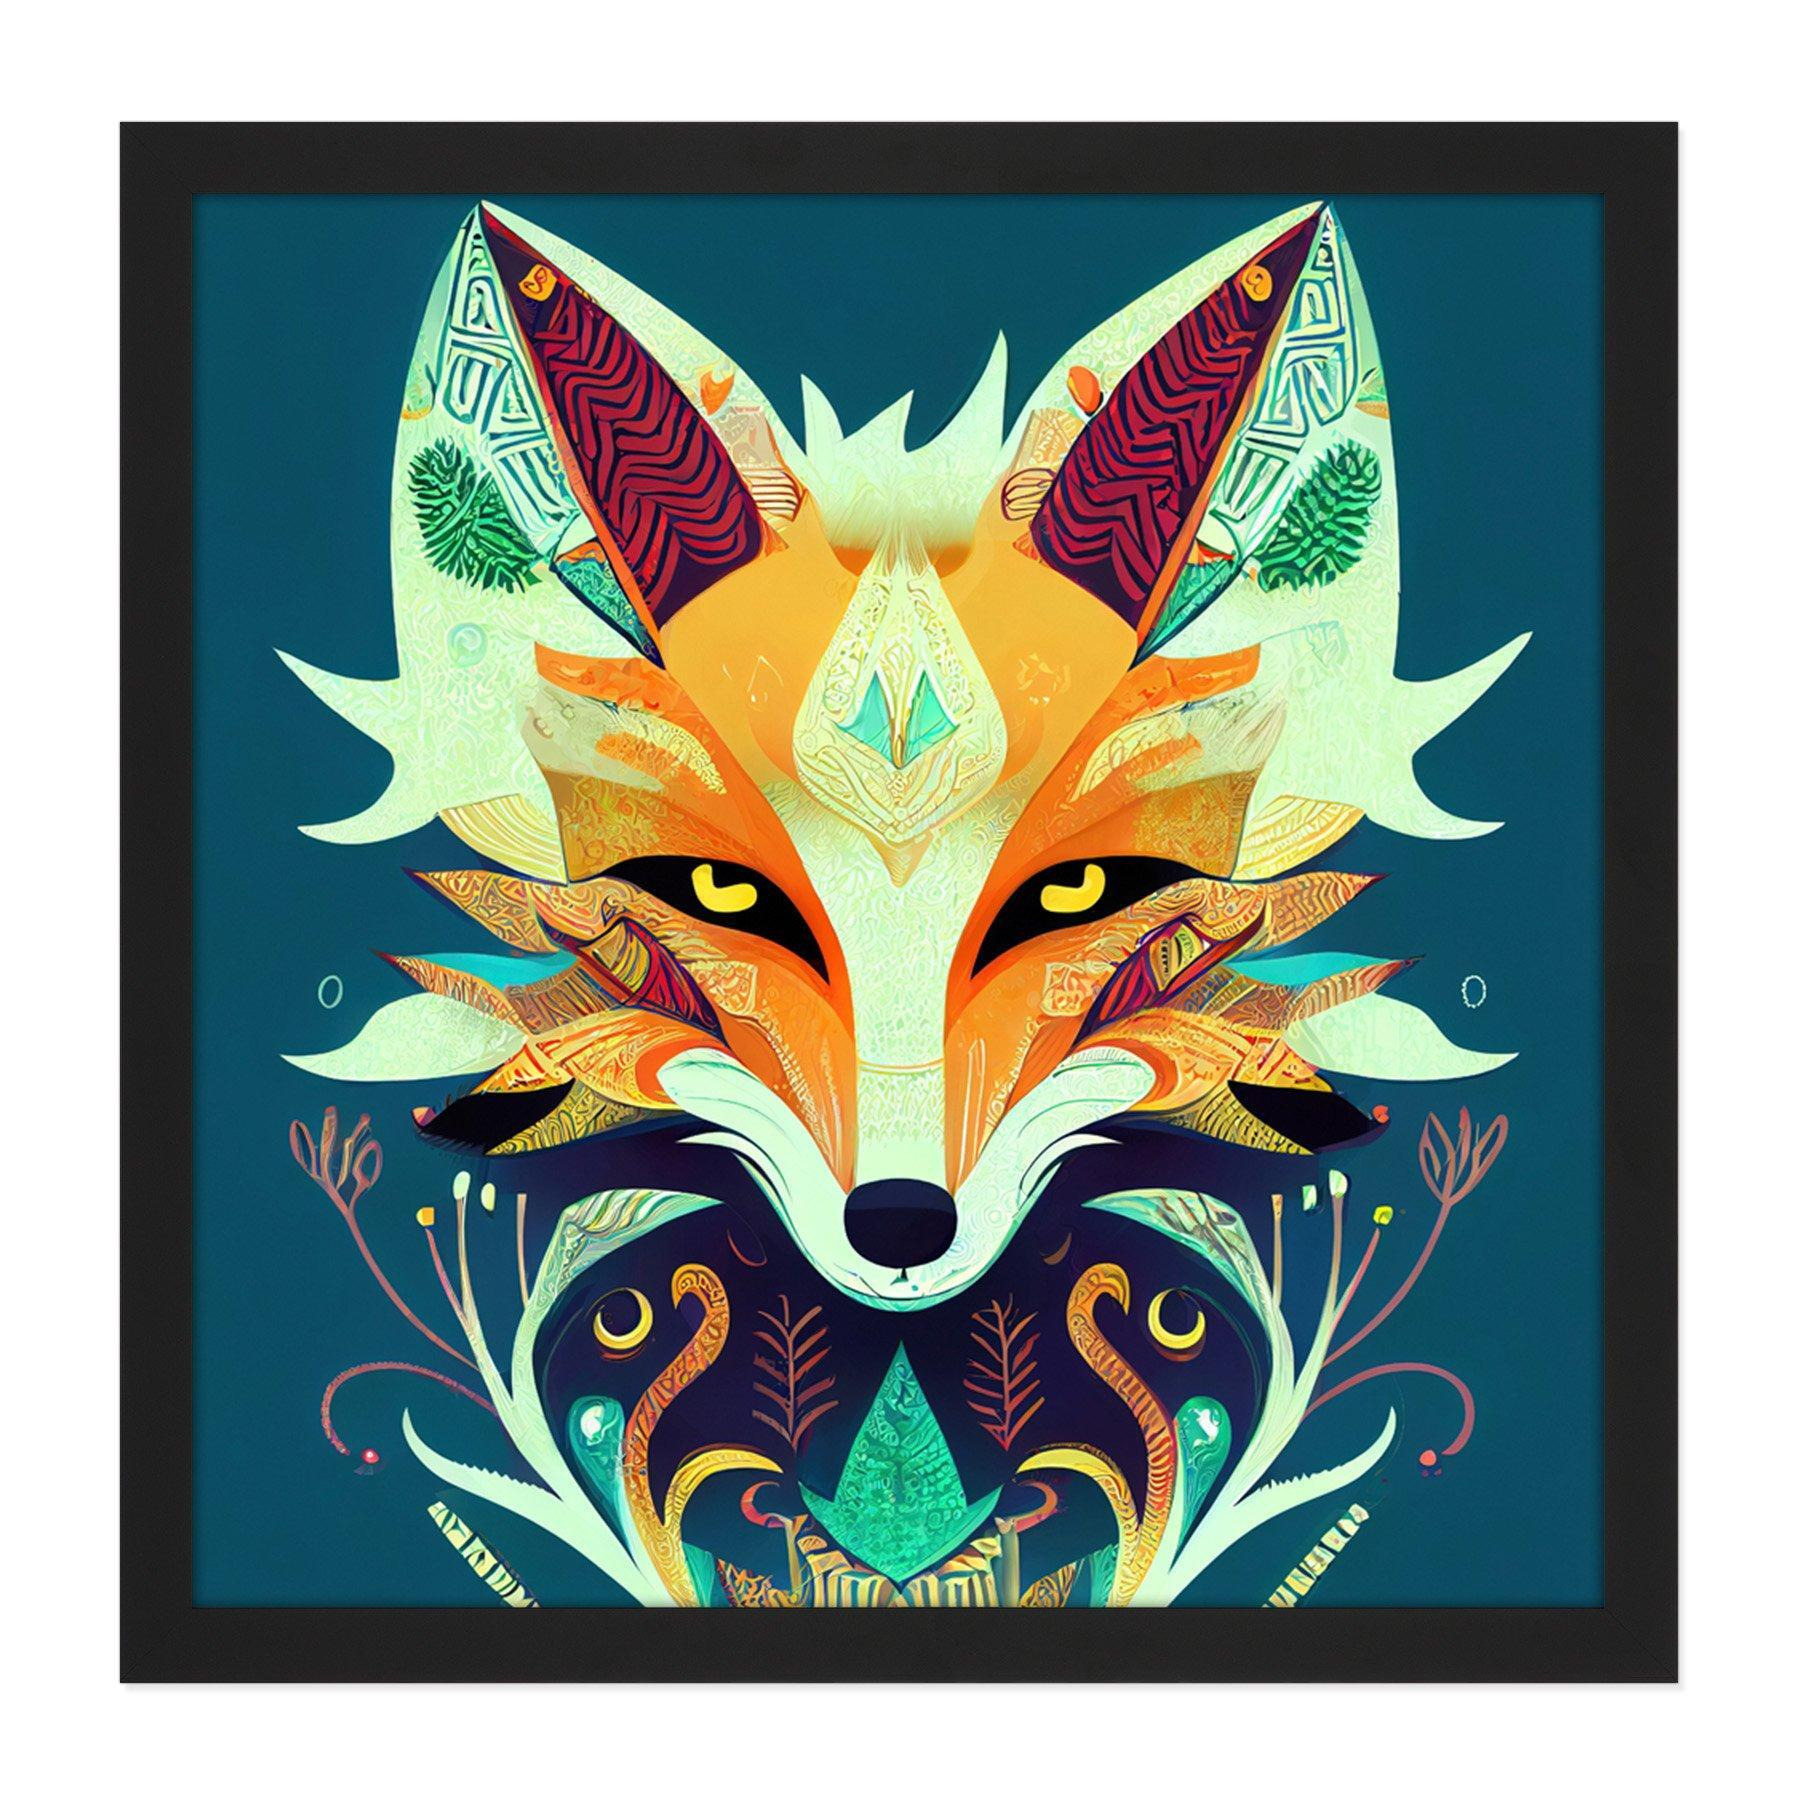 Contemporary Folk Style Fox Abstract Face Portrait Illustration Orange Teal Square Framed Wall Art Print Picture 16X16 Inch - image 1